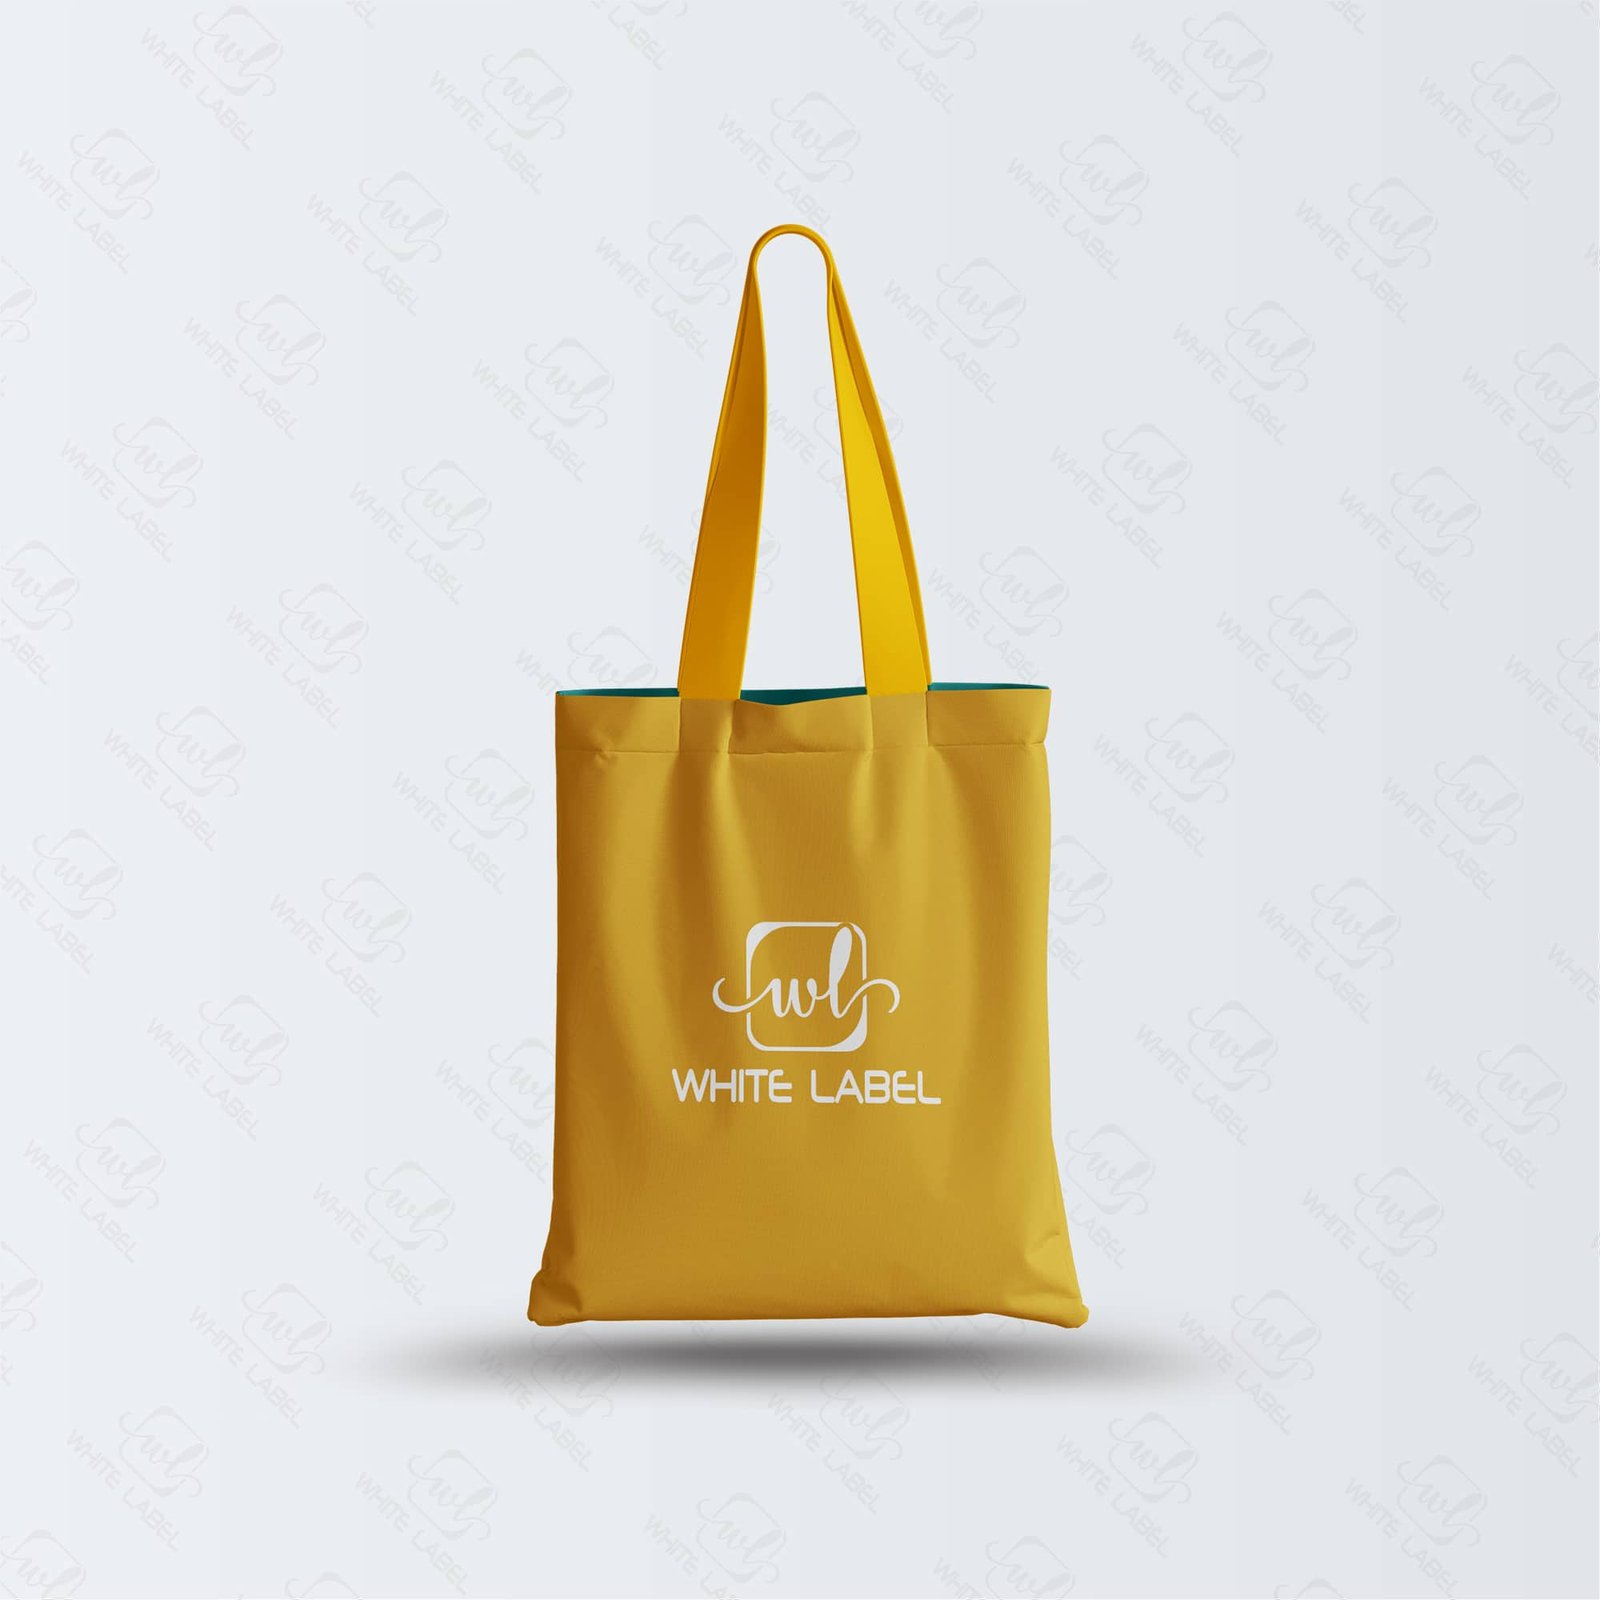 Make Your Own Customize Tote Bag, Custom Tote Bag Manufacturer